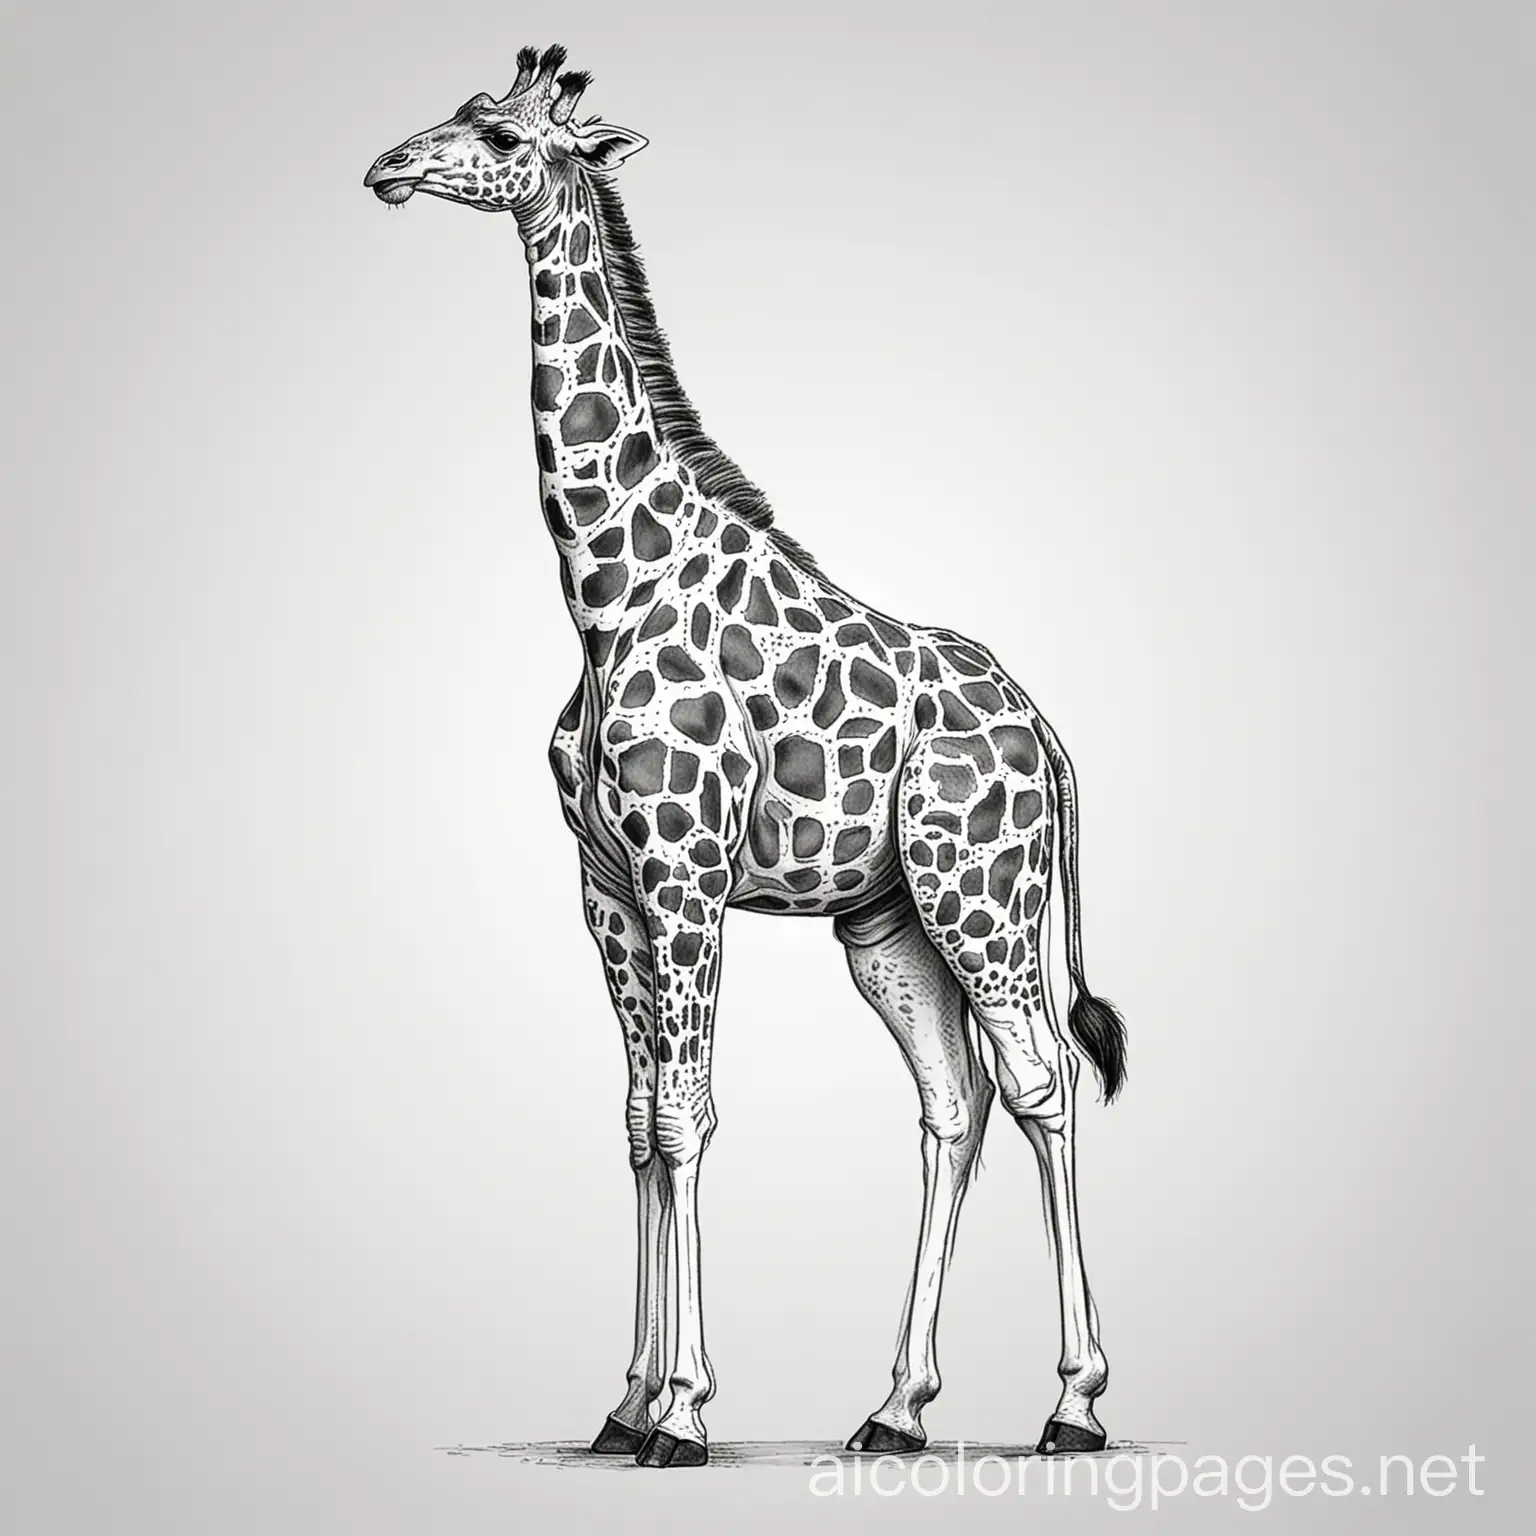 Happy-Standing-Giraffe-Coloring-Page-with-Simplicity-and-Ample-White-Space